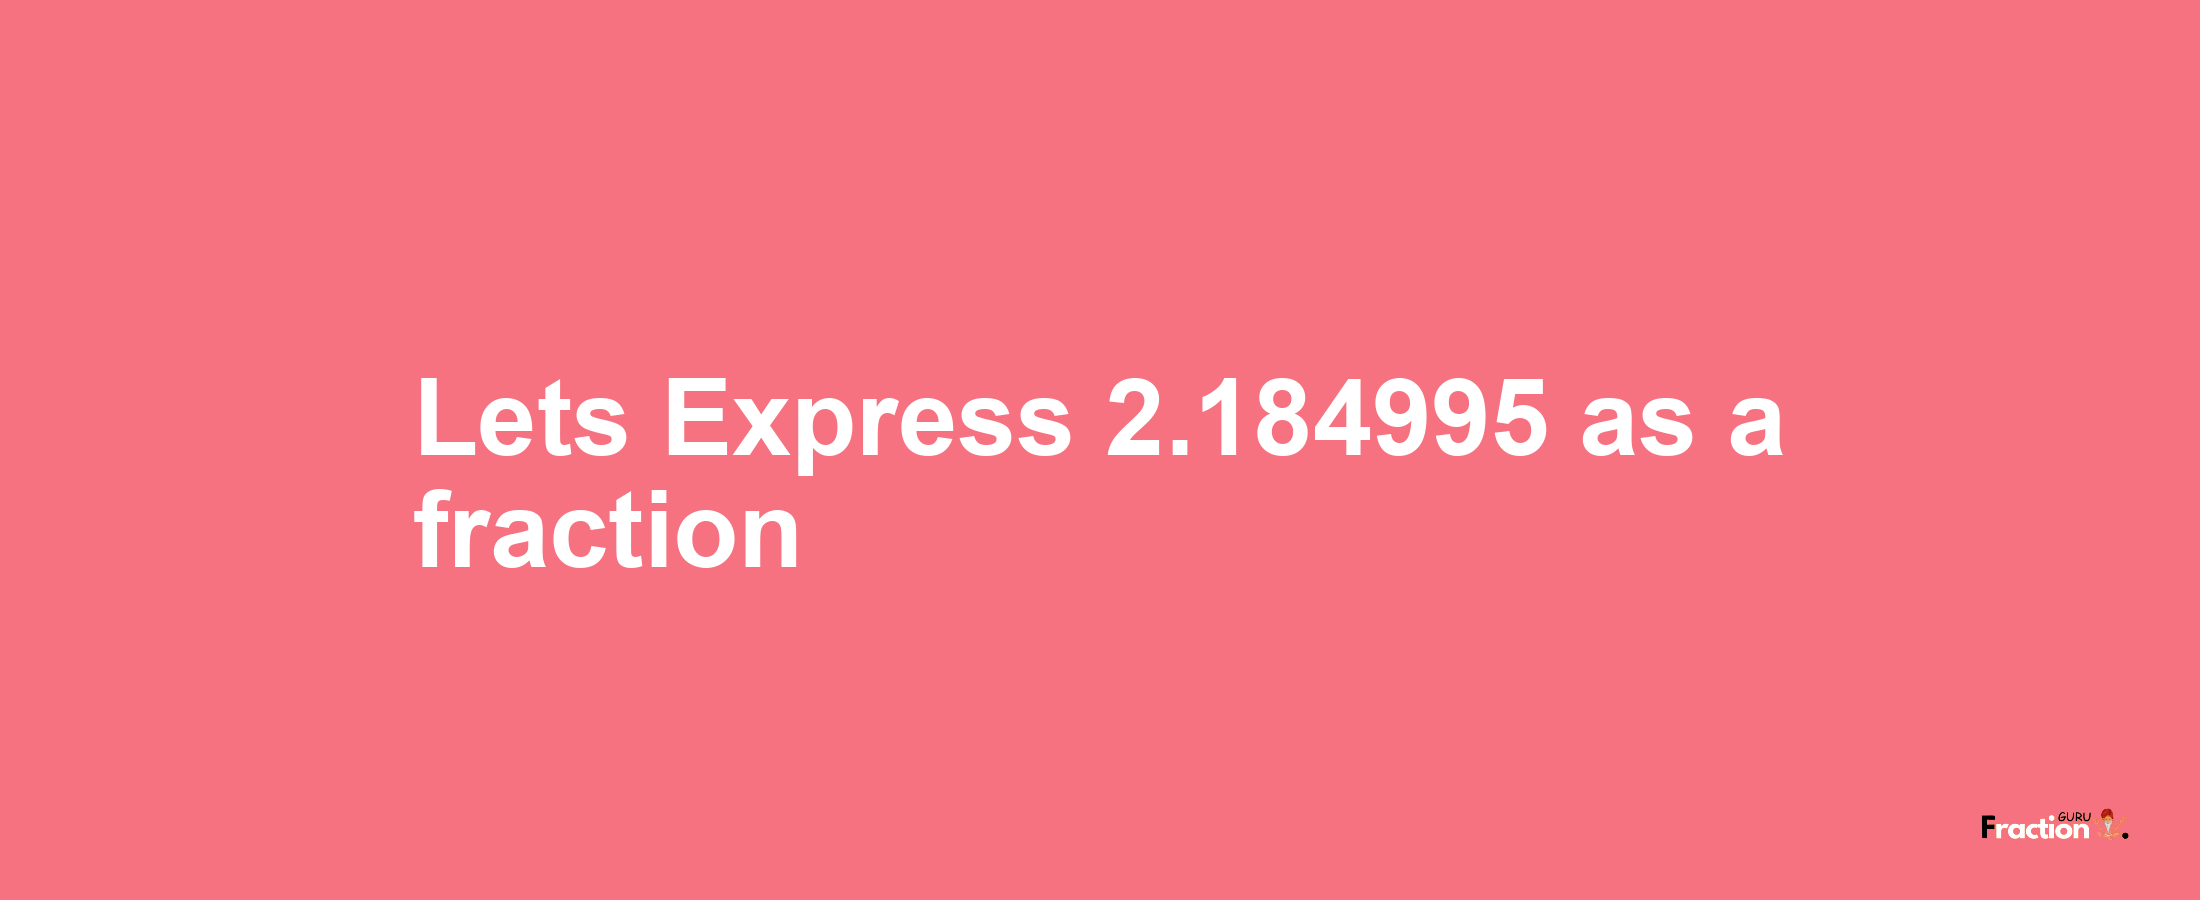 Lets Express 2.184995 as afraction